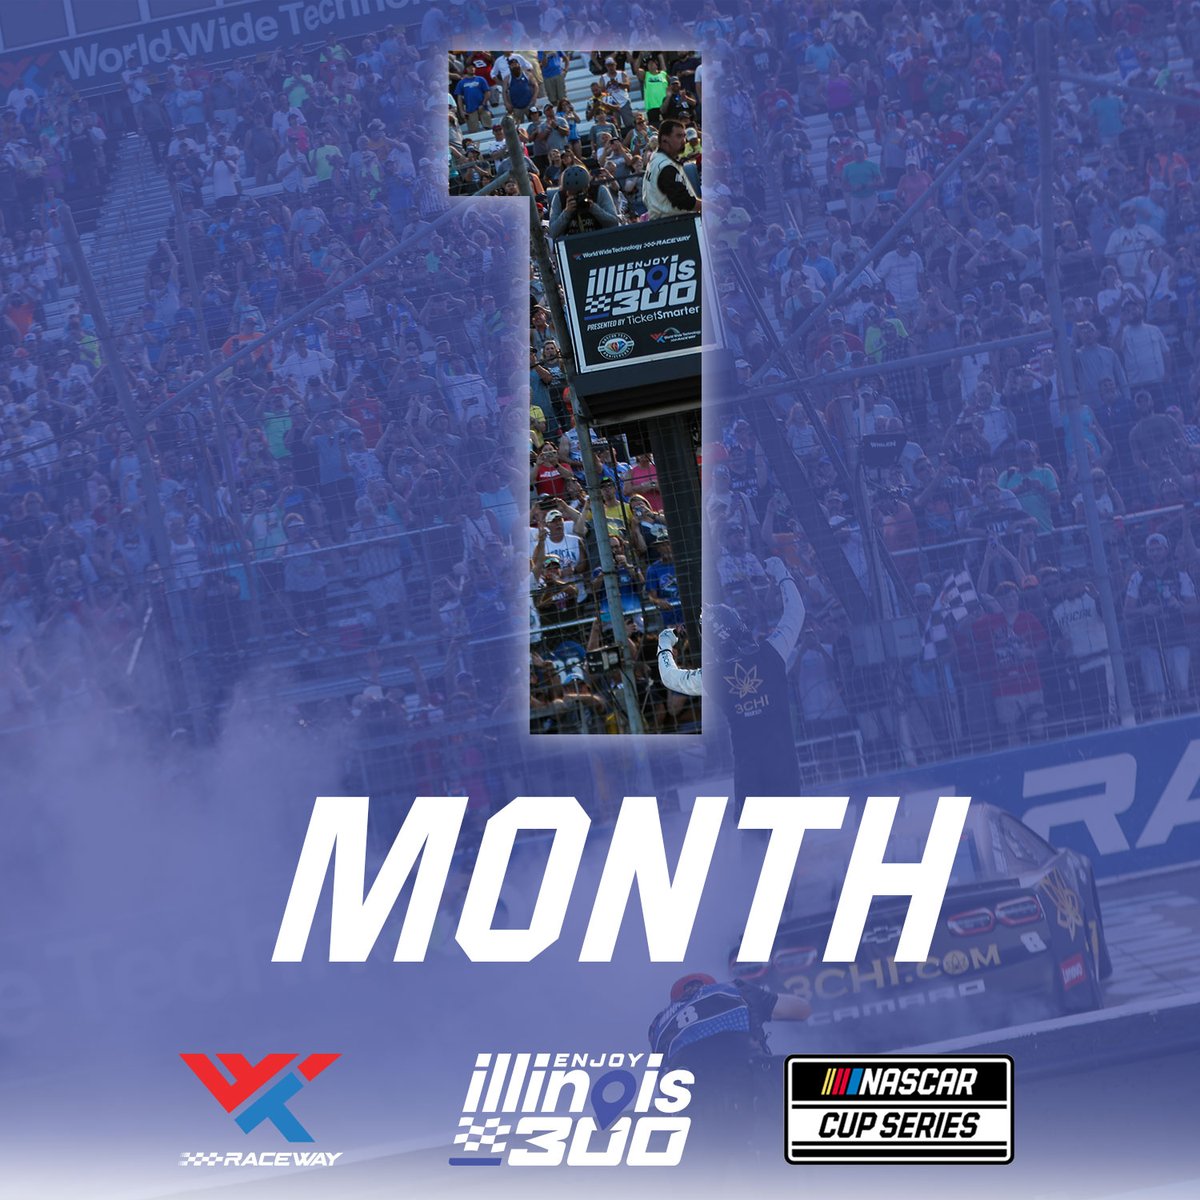 Only O N E☝️MONTH until the 2024 NASCAR #EnjoyIL300!! Come see NASCAR icons Ryan Blaney, Kyle Busch, & Joey Logano PLUS music stars Ludacris, Riley Green, Big & Rich and so many more at the Confluence Music Festival 🎶🏁 all in One Ticket! Get yours now➡️ bit.ly/411ktZh